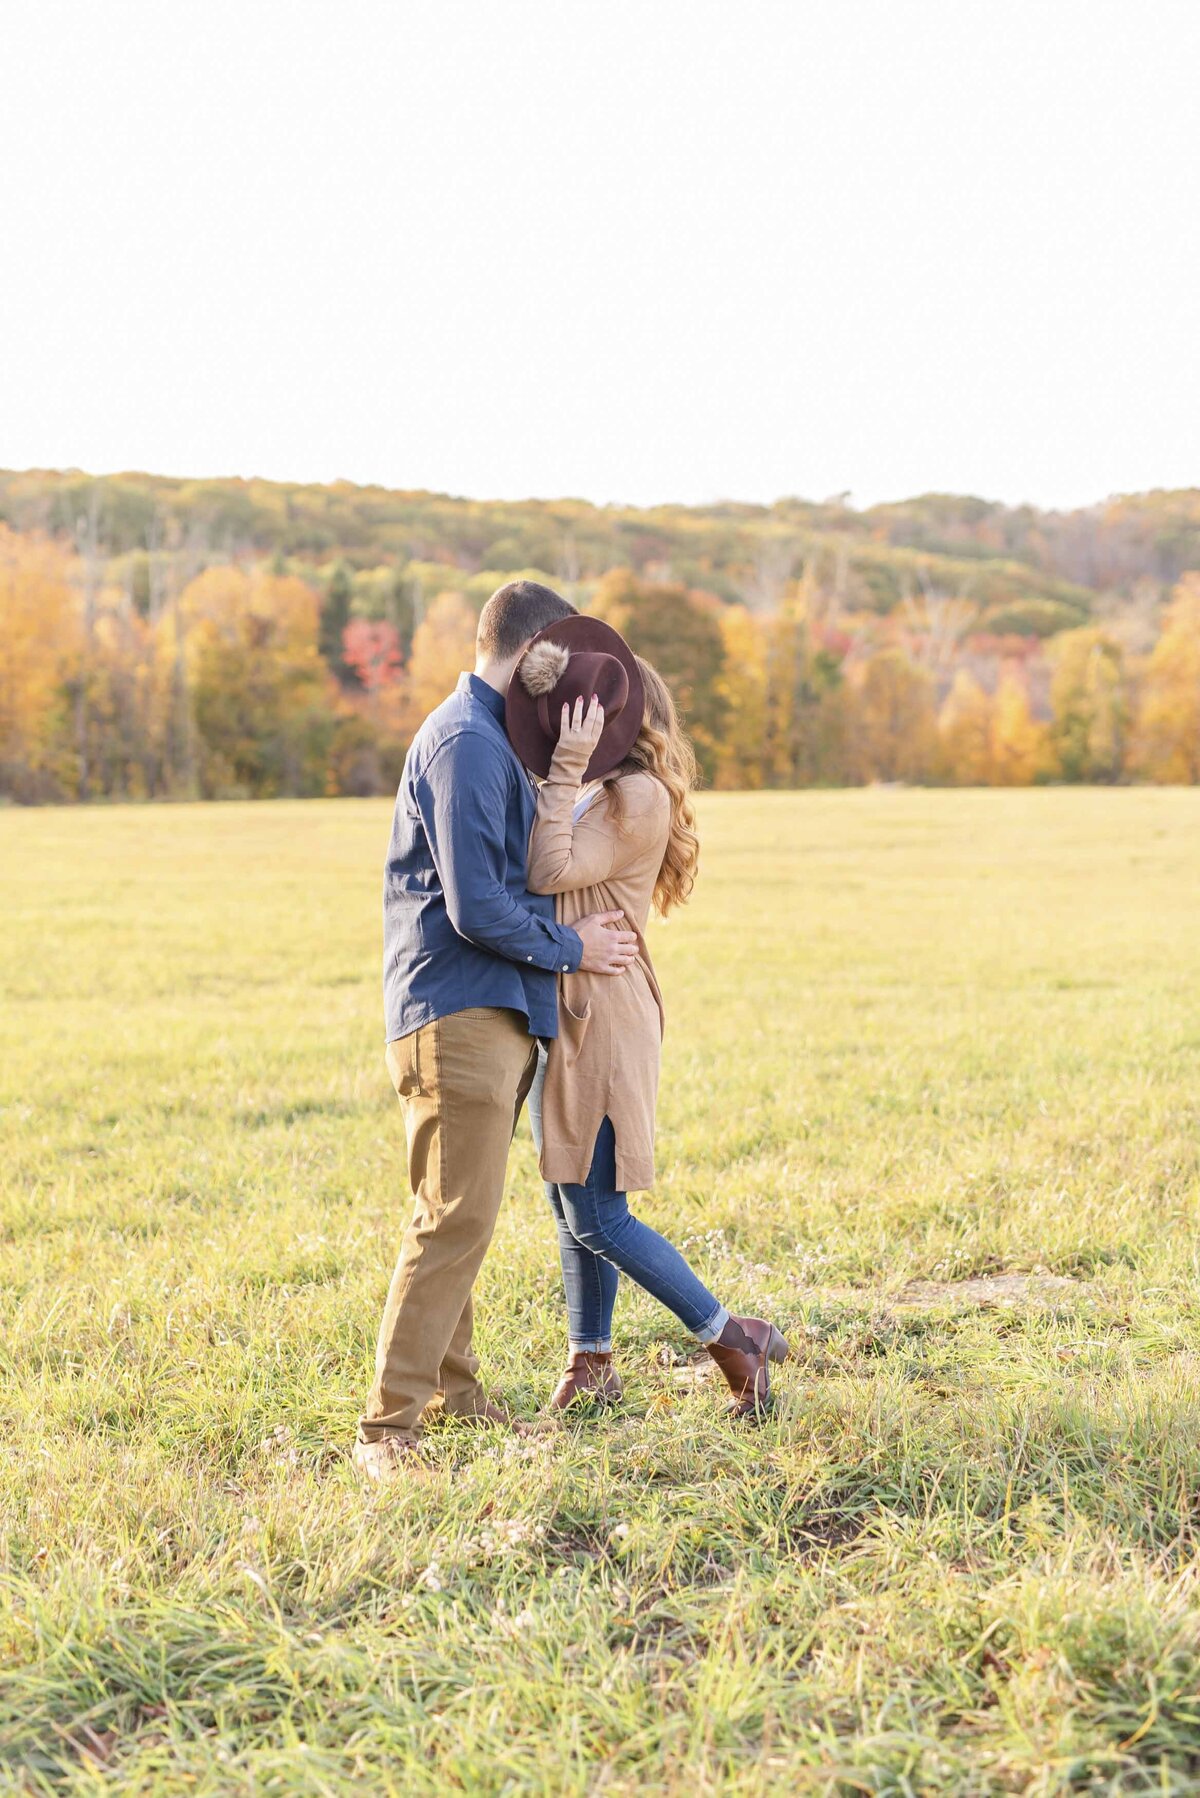 Kate and Zach’s fall engagement session photographed by Schwalbs Photography